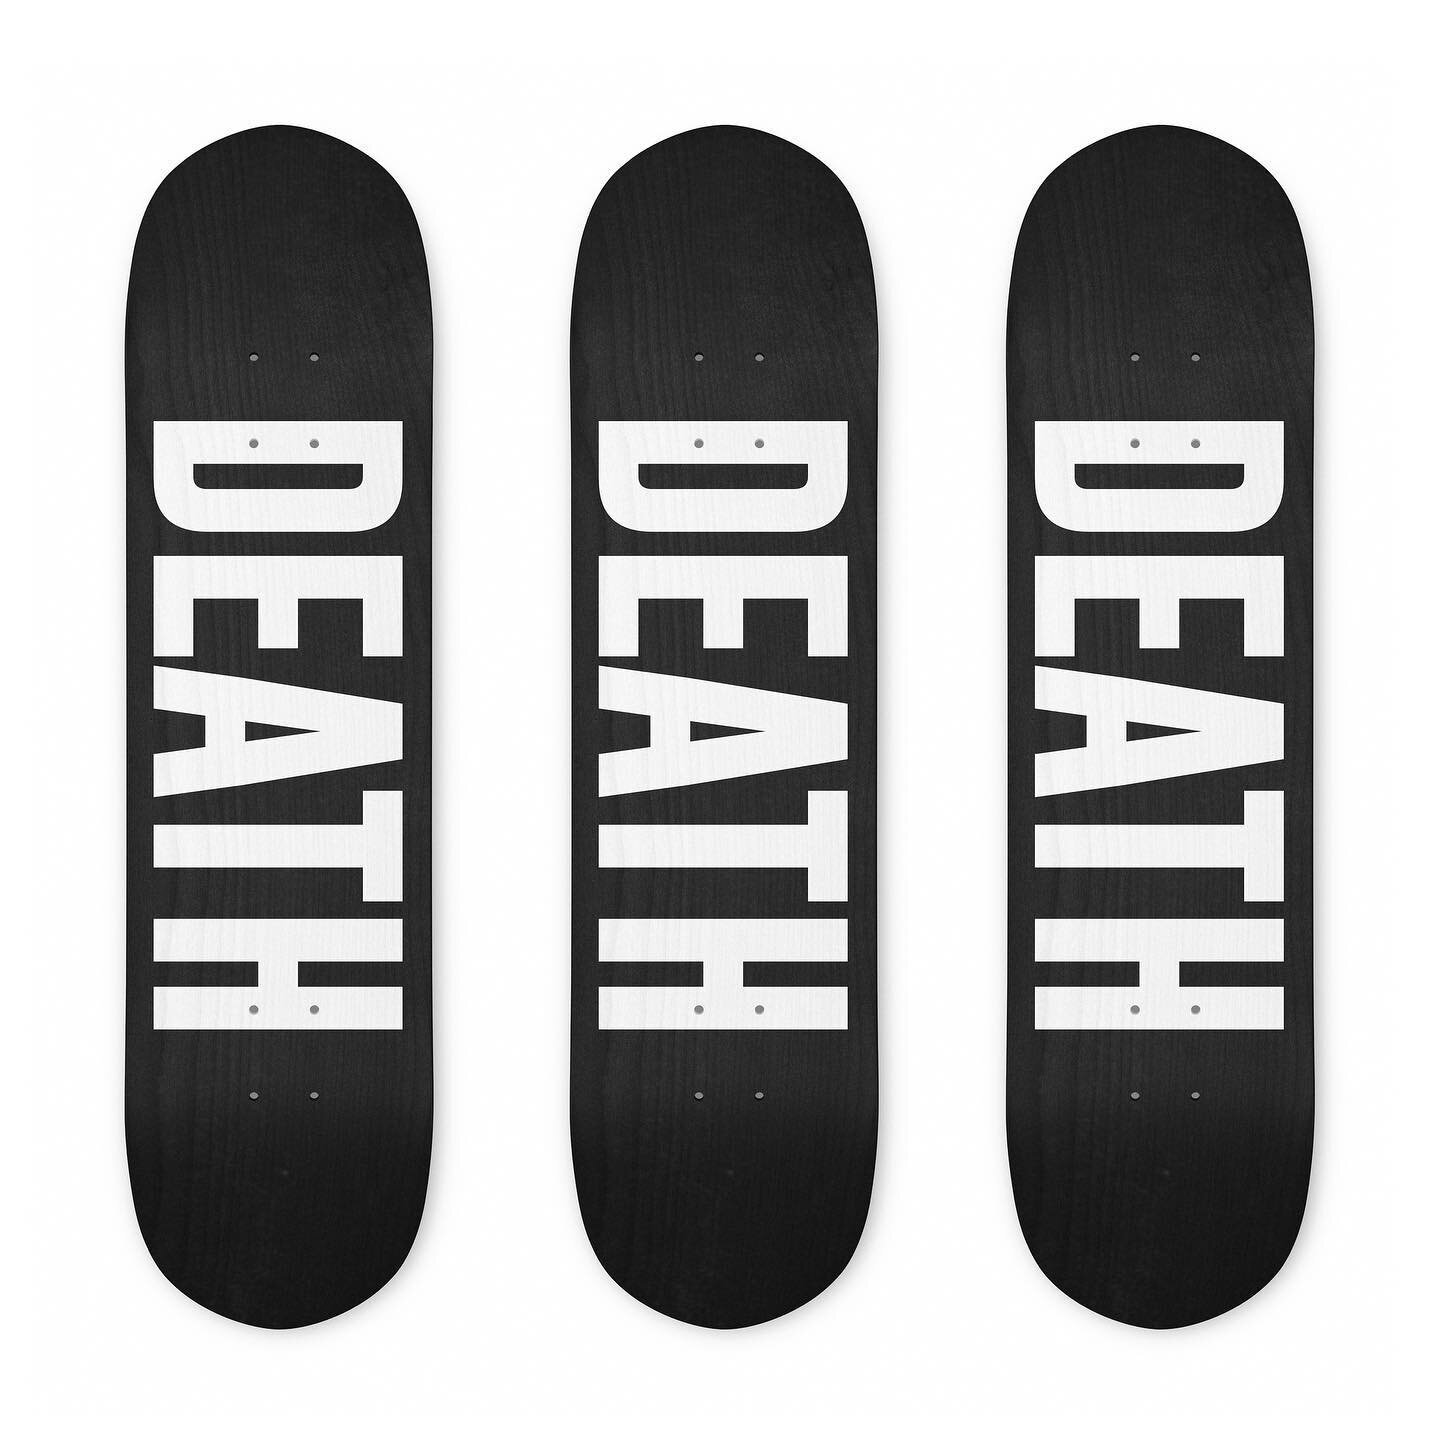 Update: the DEATH-decks are sold out. Thanks to everyone who got their hands on one.
Enjoy hurting yourselves.
#deathpatches #meatcrayon #openfacehelmet #seebone